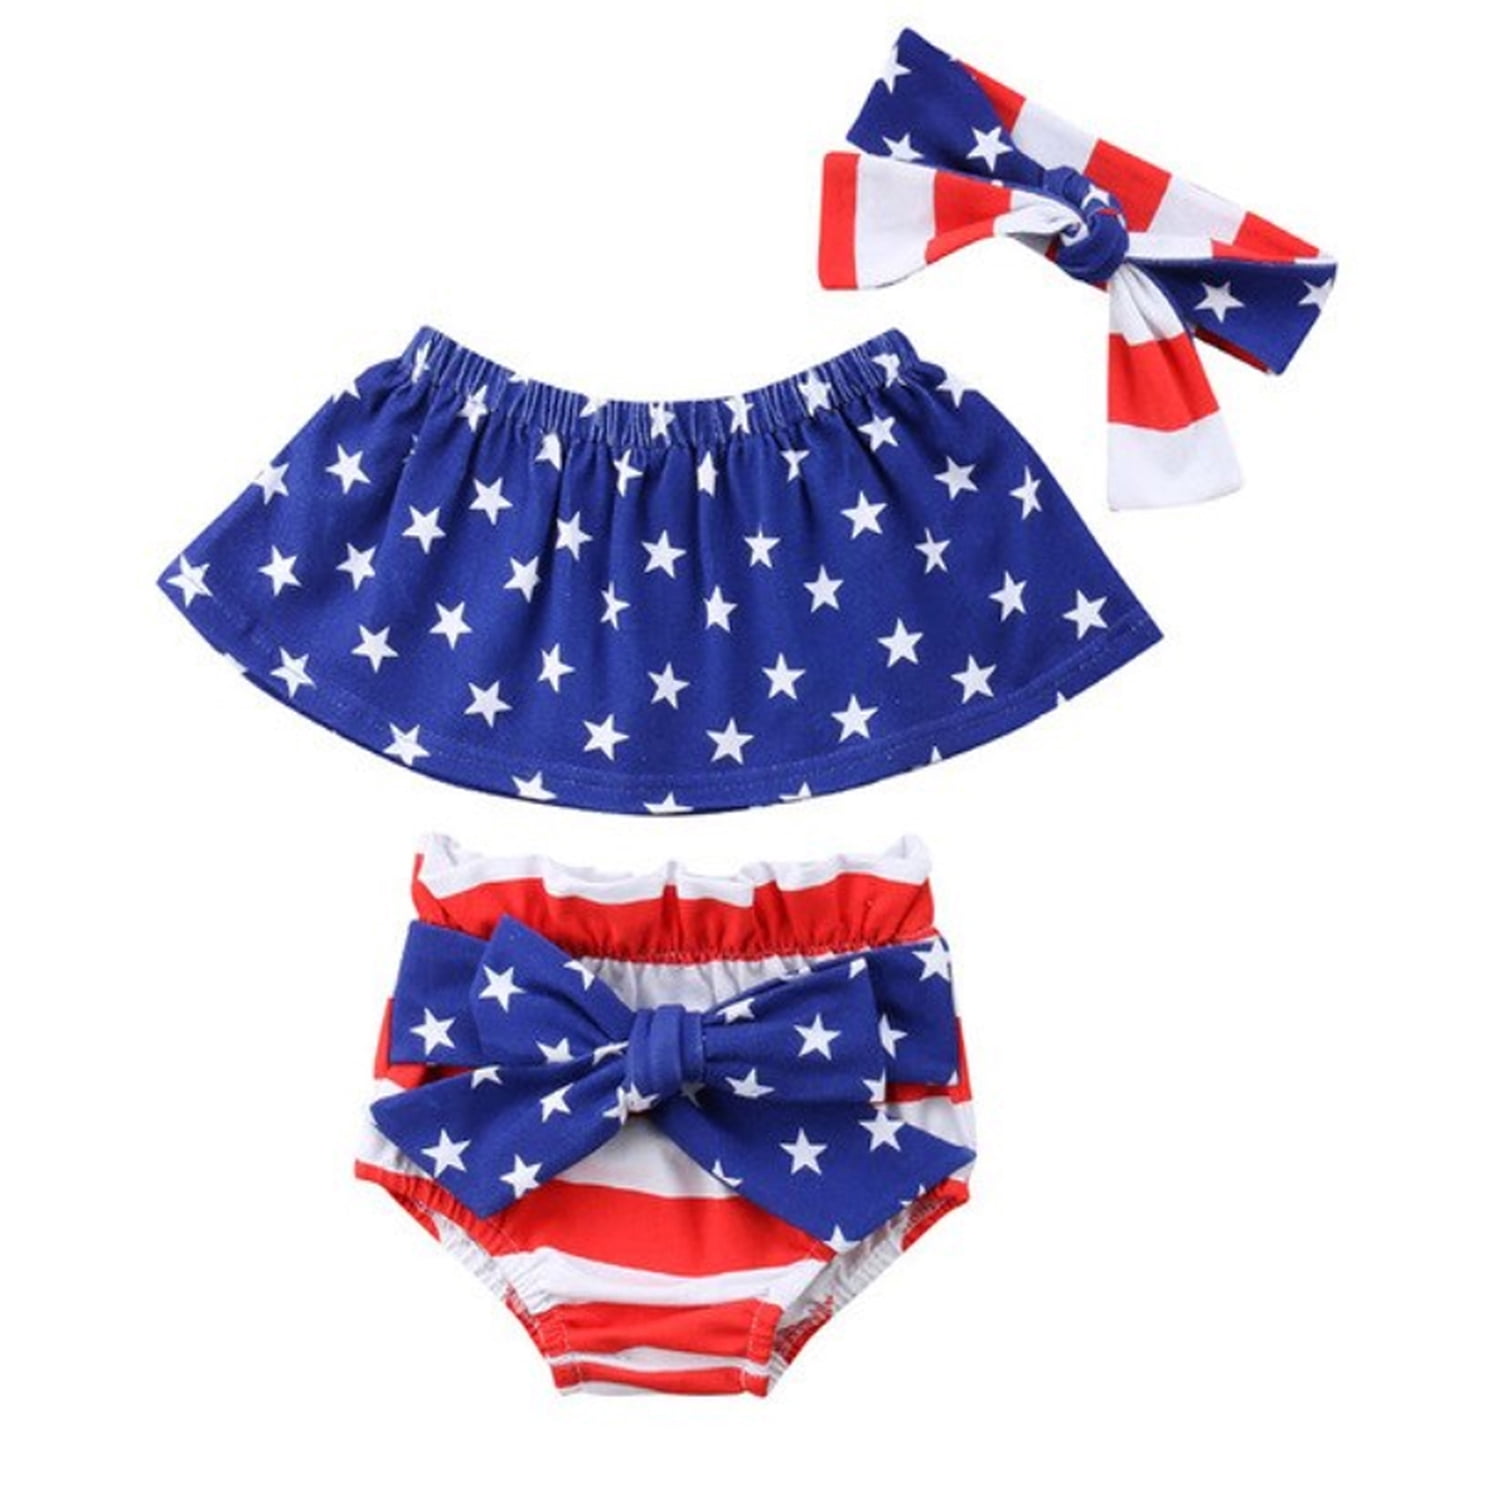 NEW Boutique Patriotic Baby Girls 4th of July Ruffle Romper Jumpsuit 